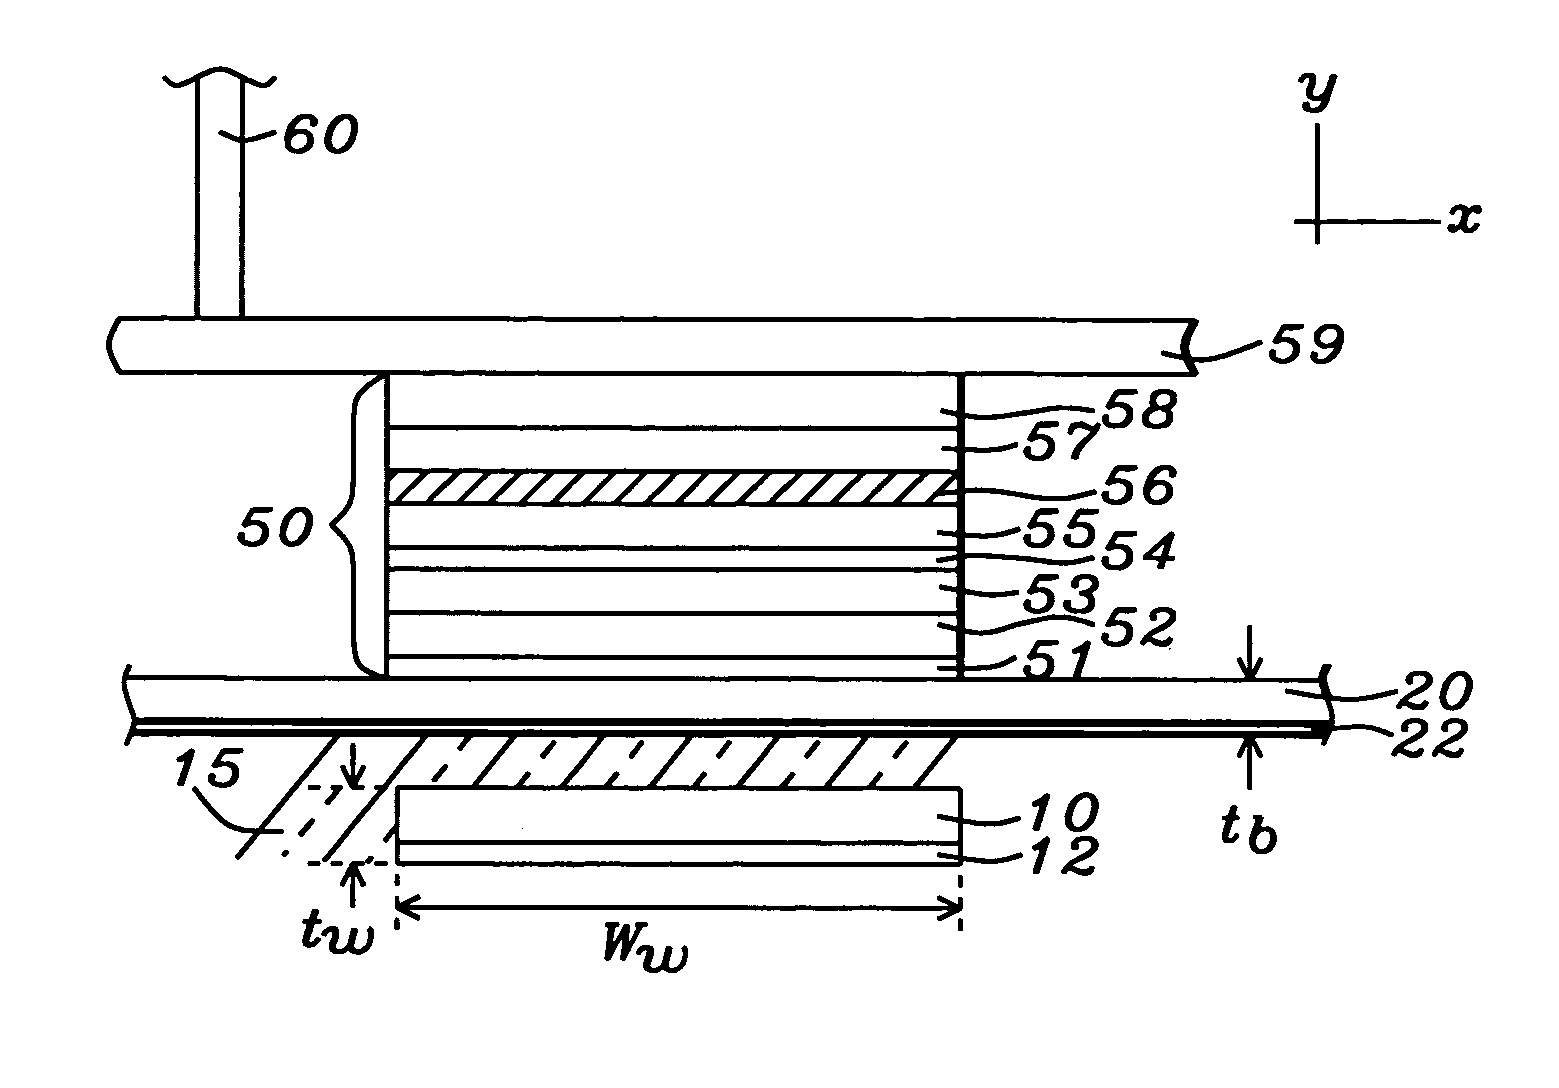 Magnetic random access memory array with proximate read and write lines cladded with magnetic material